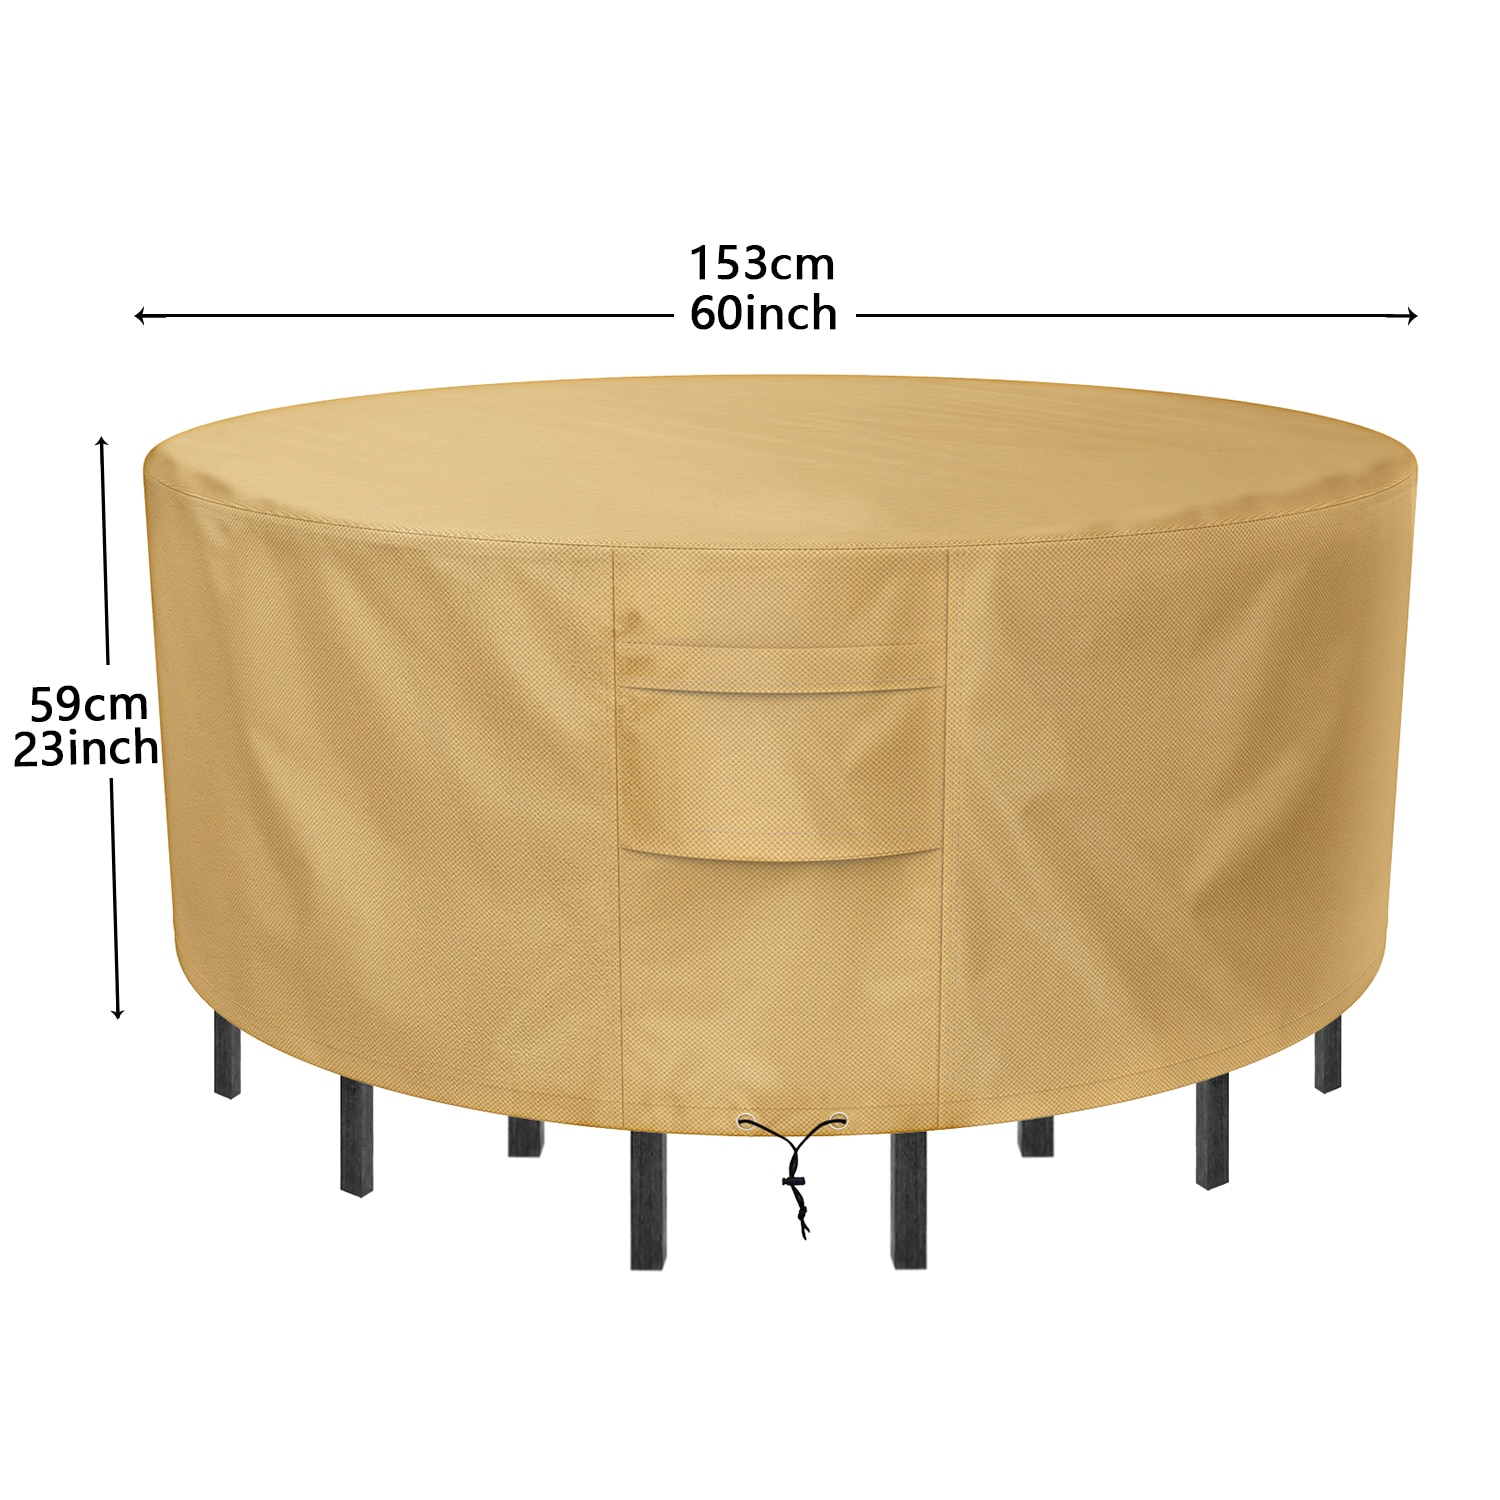 Us 3279 20 Offranton Sunkorto Patio Table Cover Waterproof Wear Resistant Patio Furniture Chair Covers 60 Inch Diameter Light Brown In Tablecloths for measurements 1500 X 1500